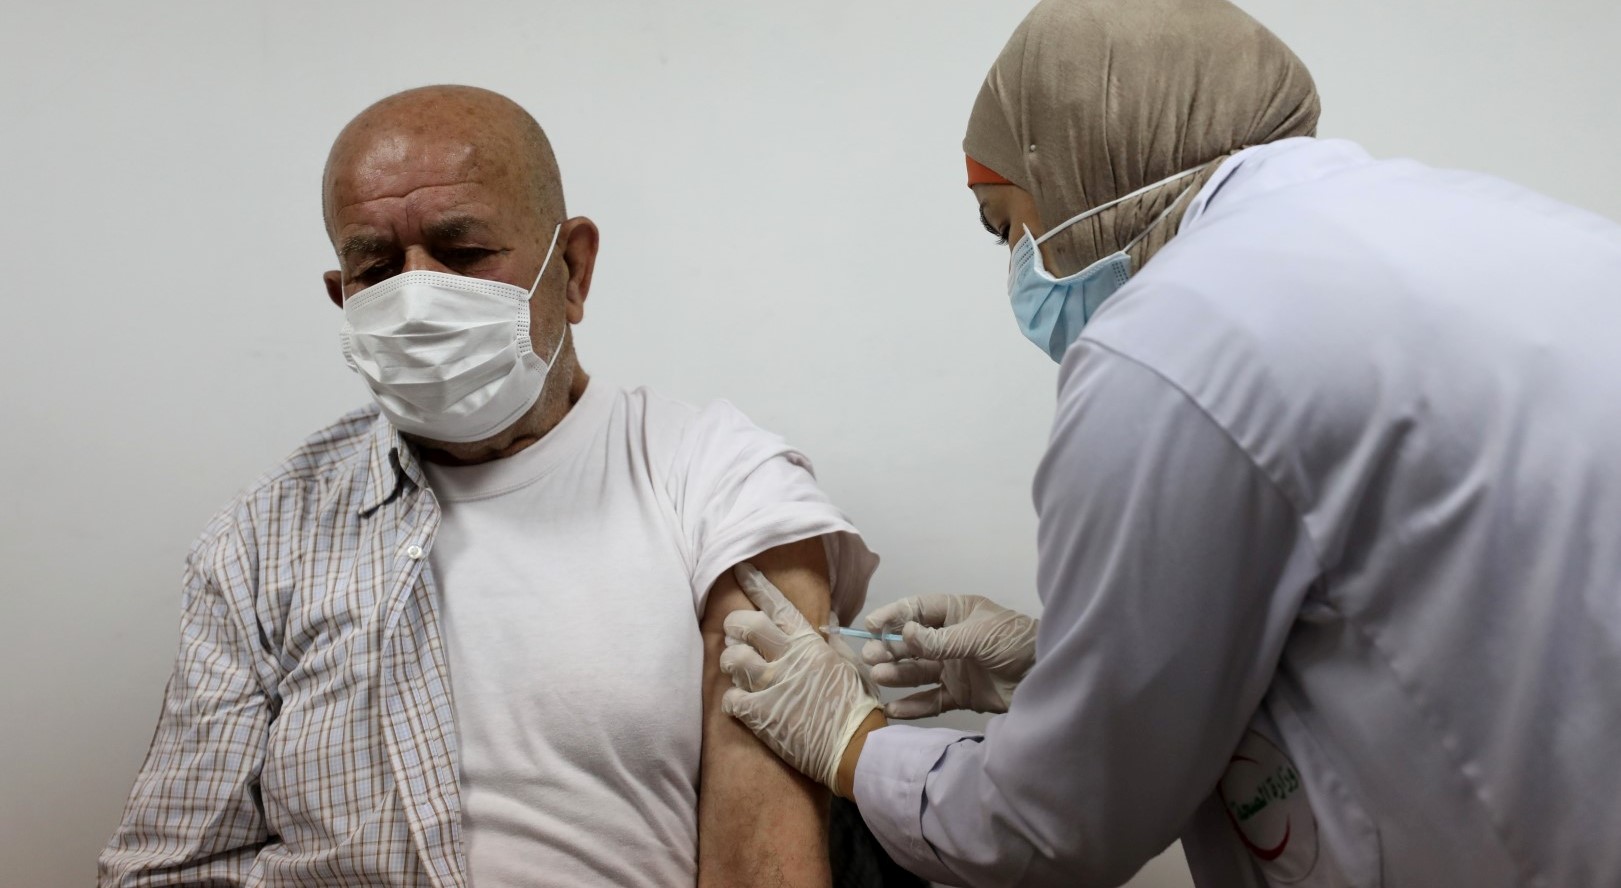 A Palestinian resident of the West Bank receives a vaccination against COVID-19.